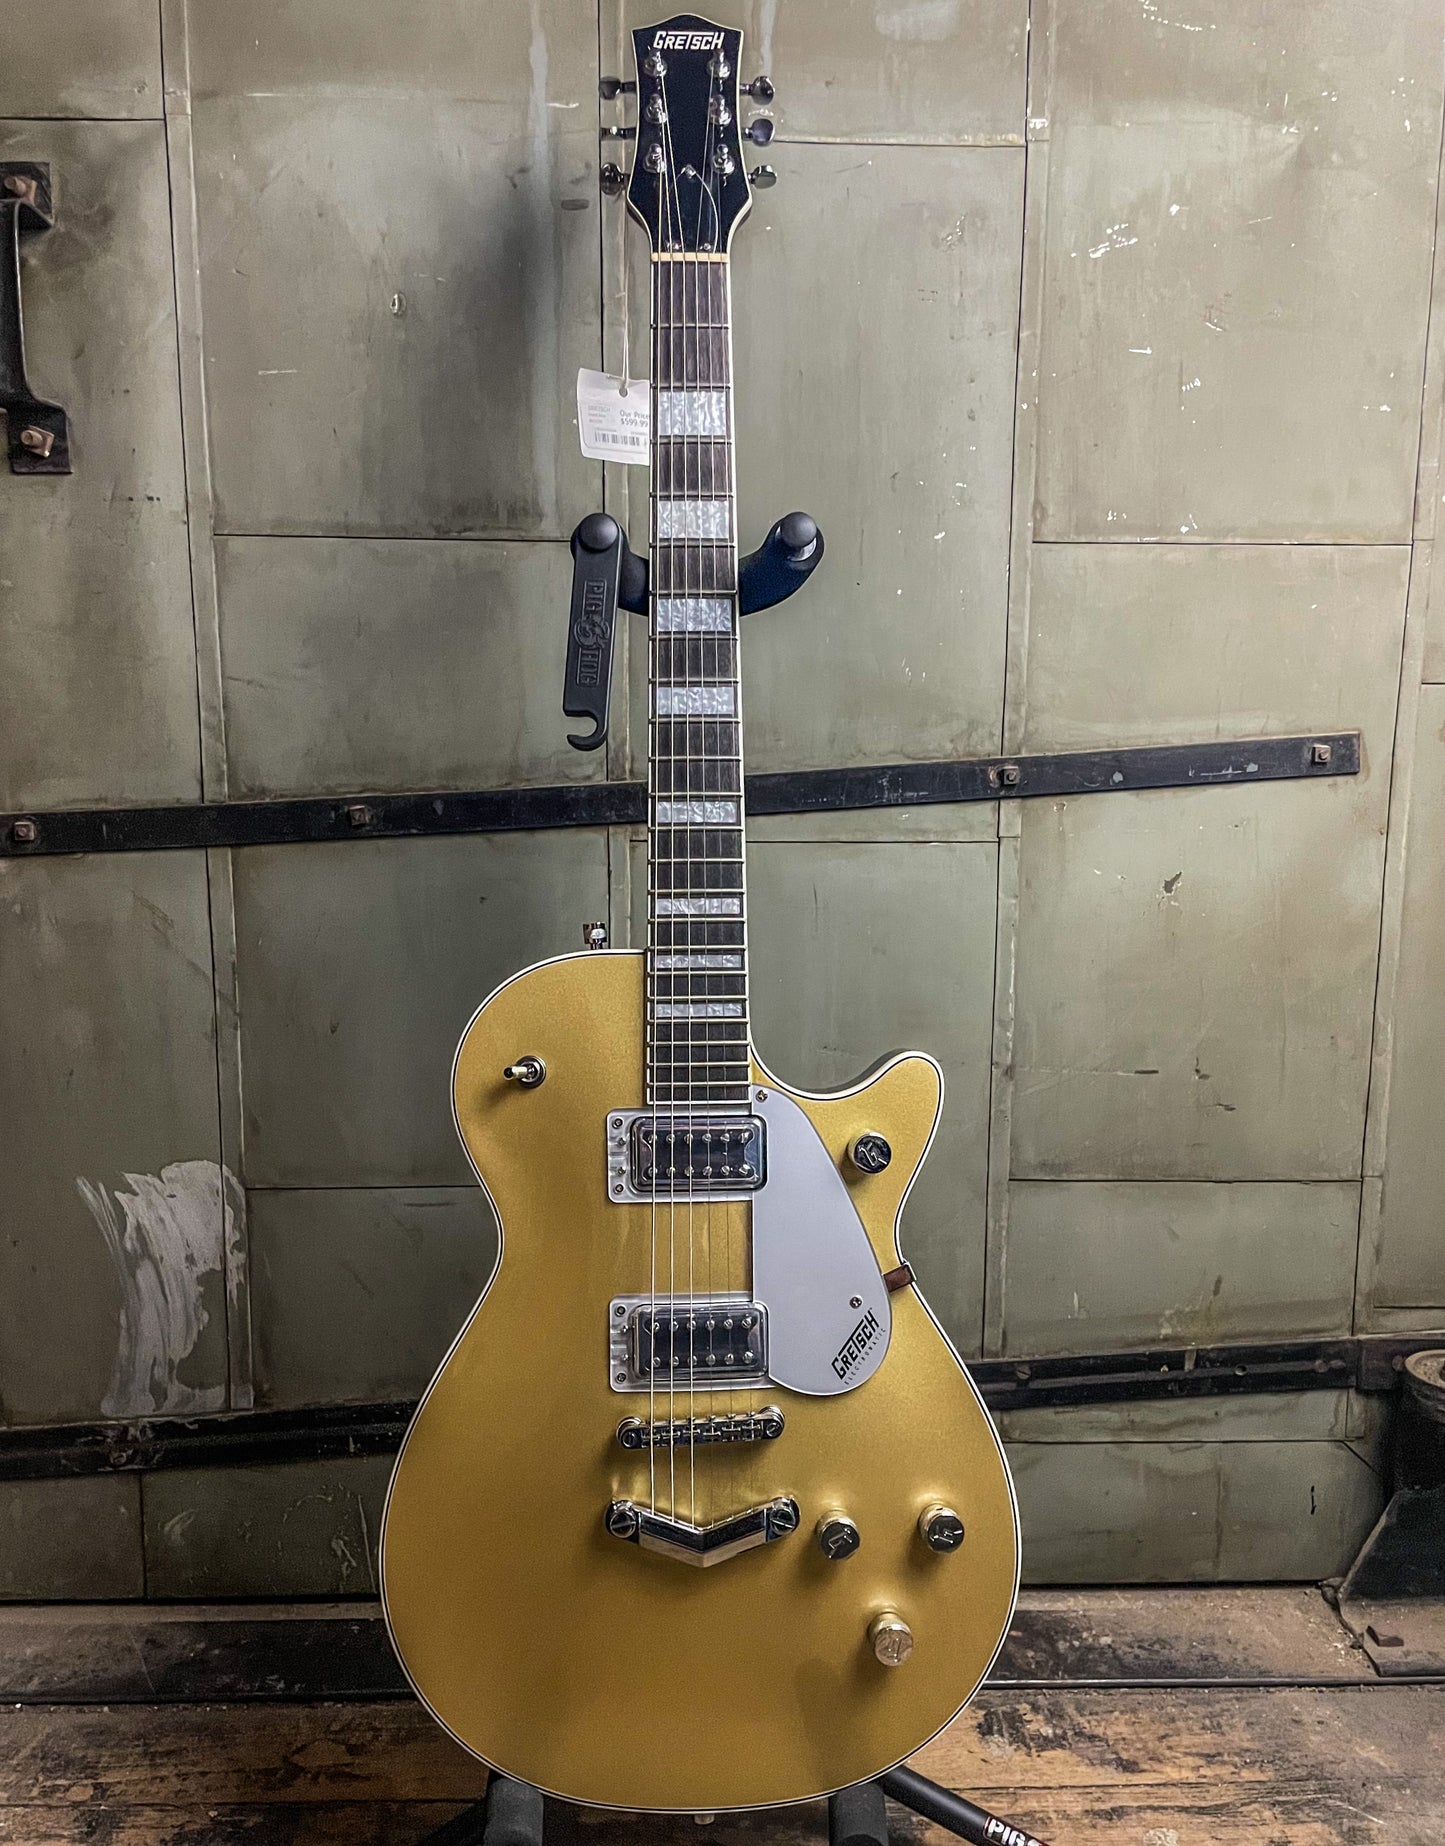 G5220 Electromatic Jet BT with V-Stoptail-Casino Gold